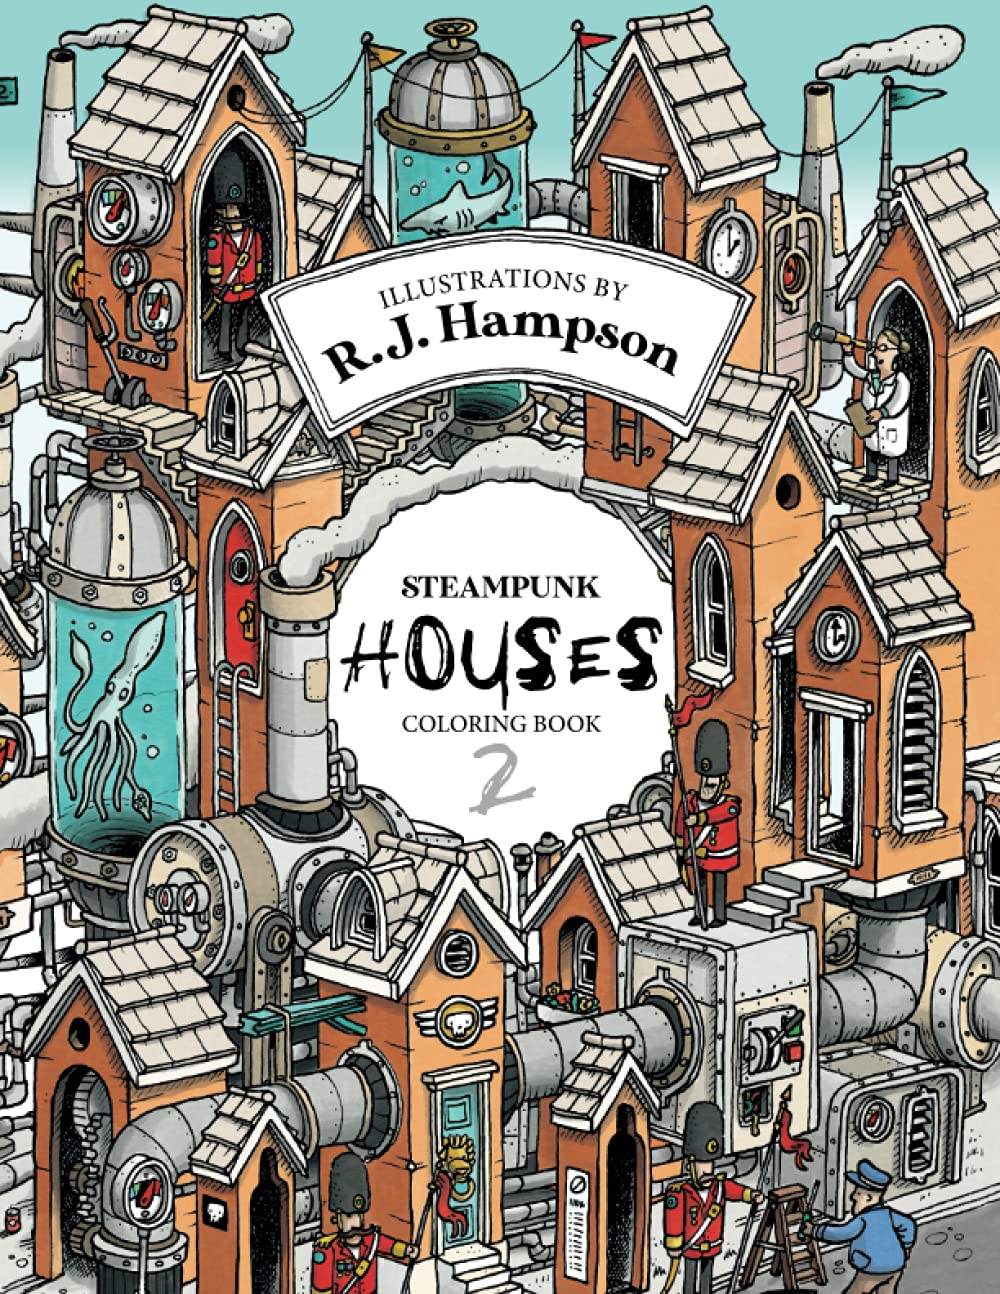 Steampunk Houses 2 Coloring Book (R.J. Hampson Coloring Books) (Paperback)